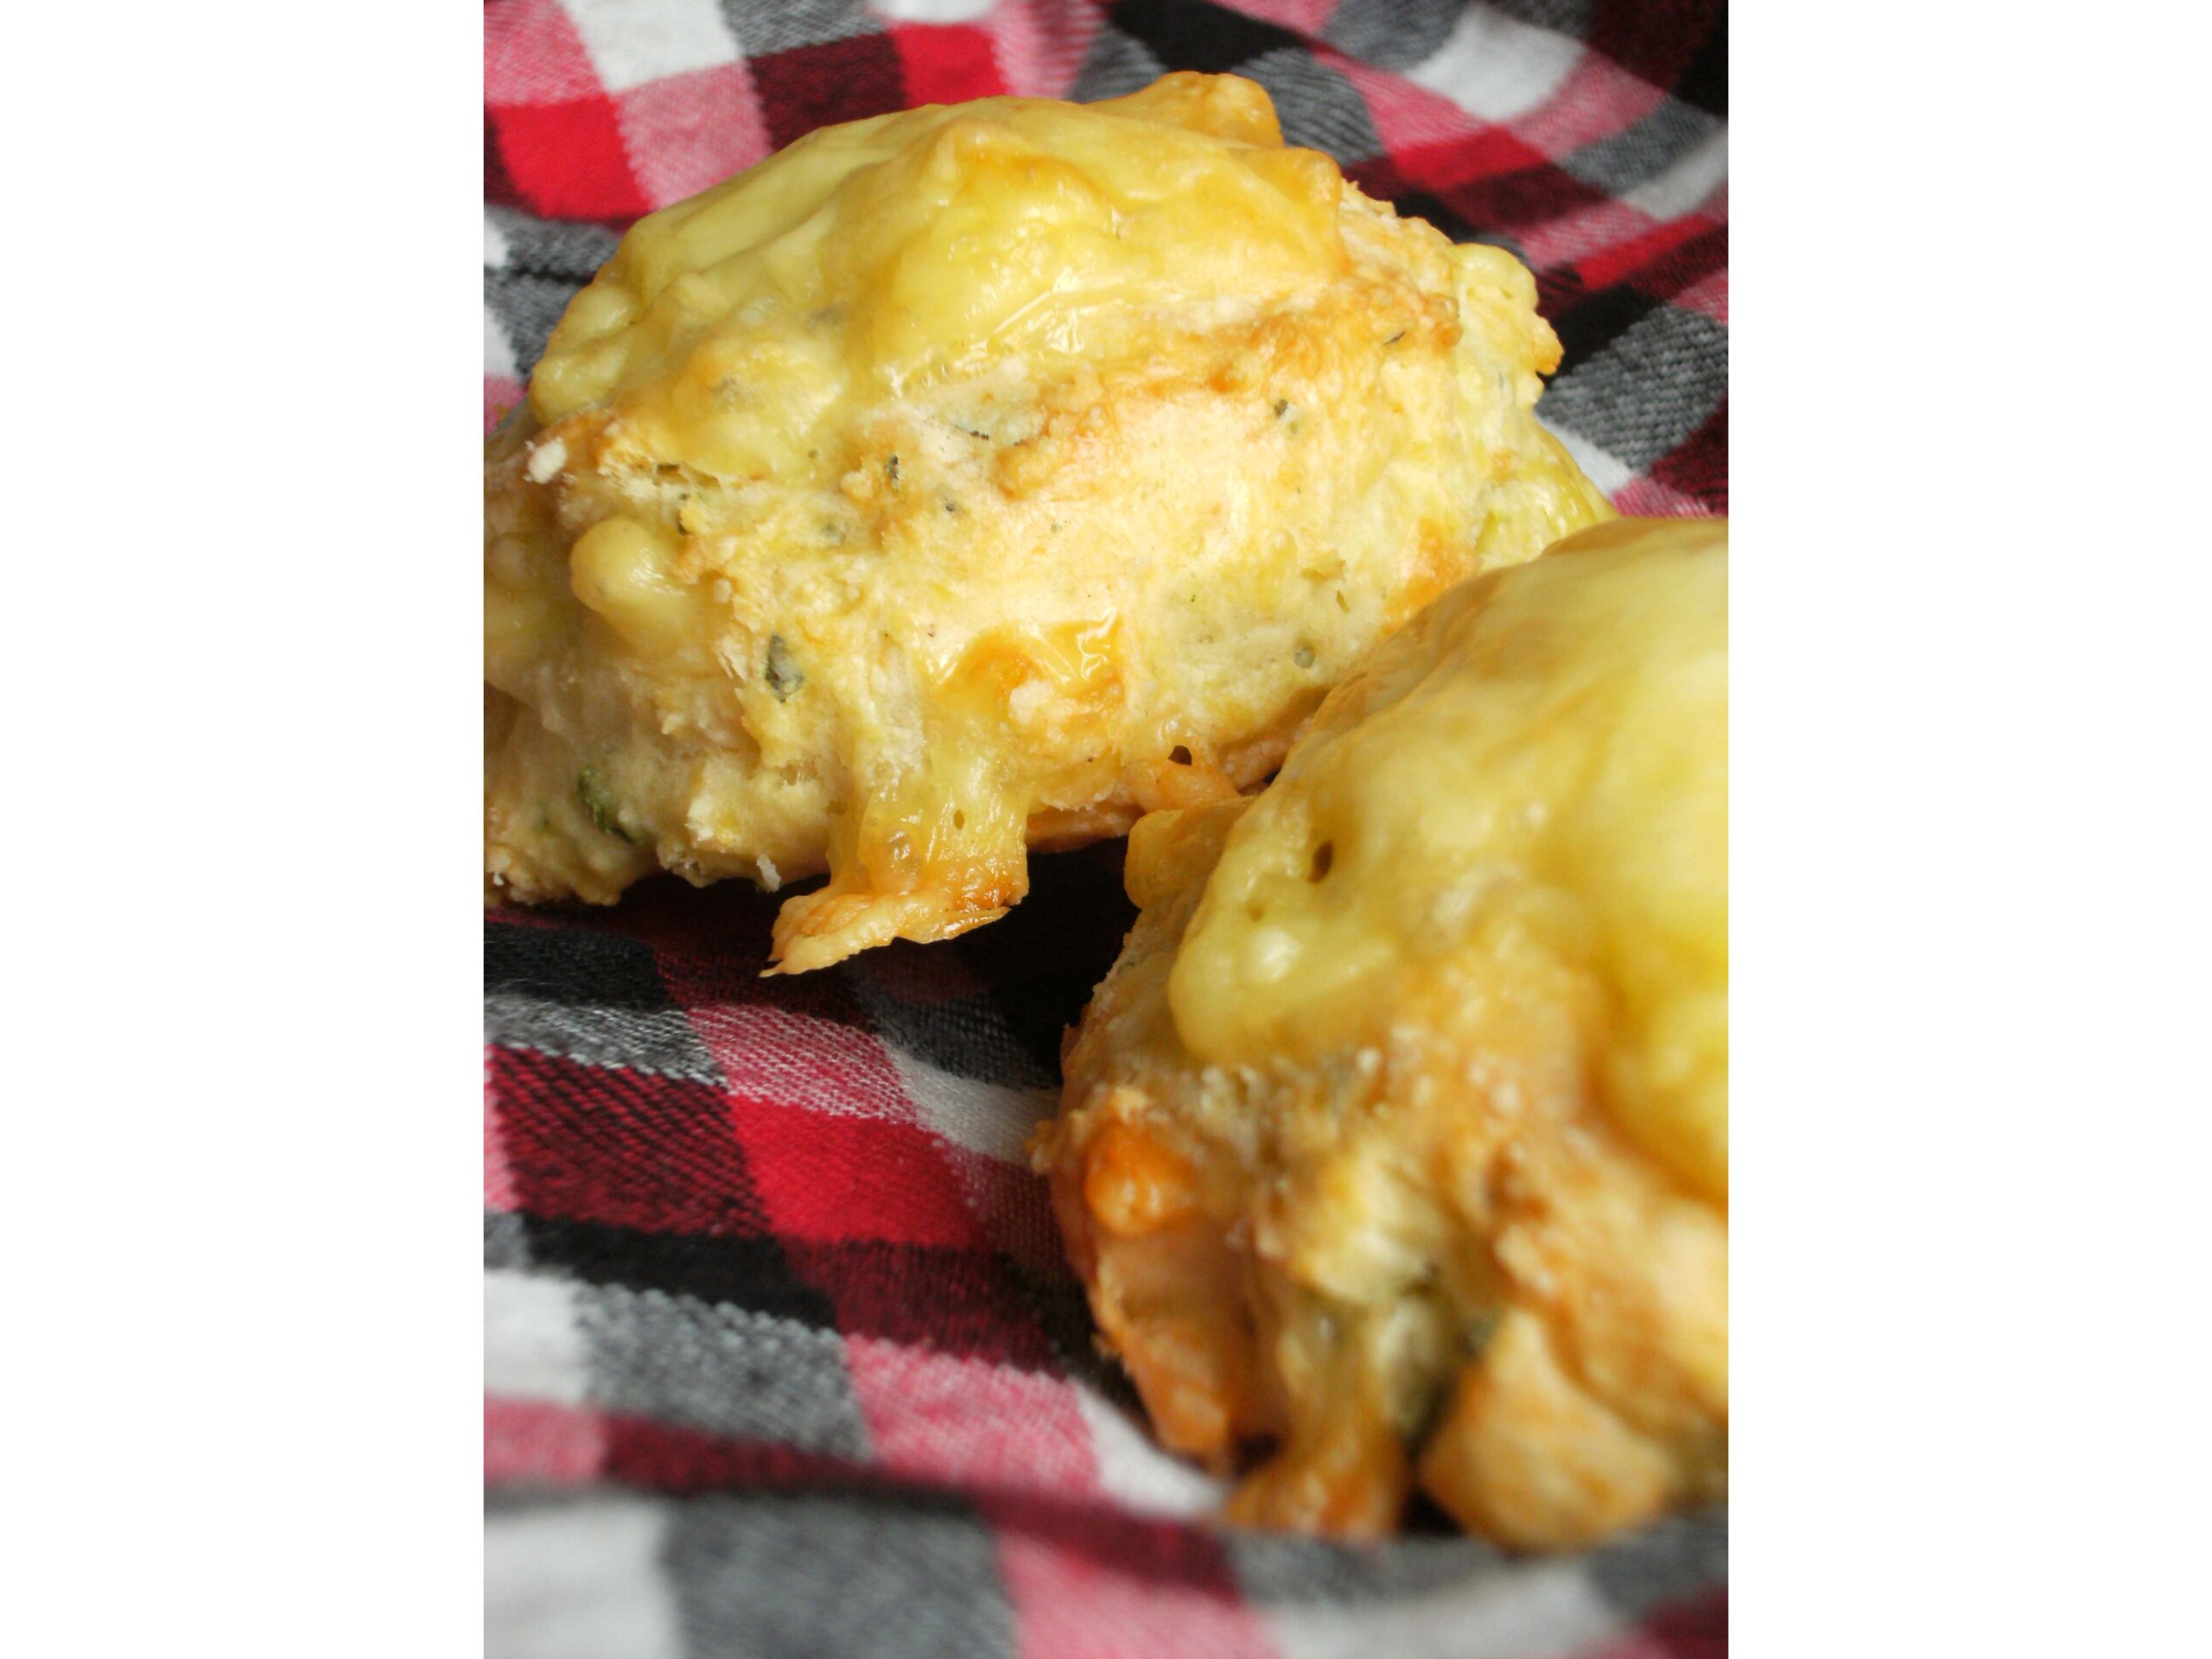  Who says scones have to be sweet? These cheesy delights are the perfect savory option.